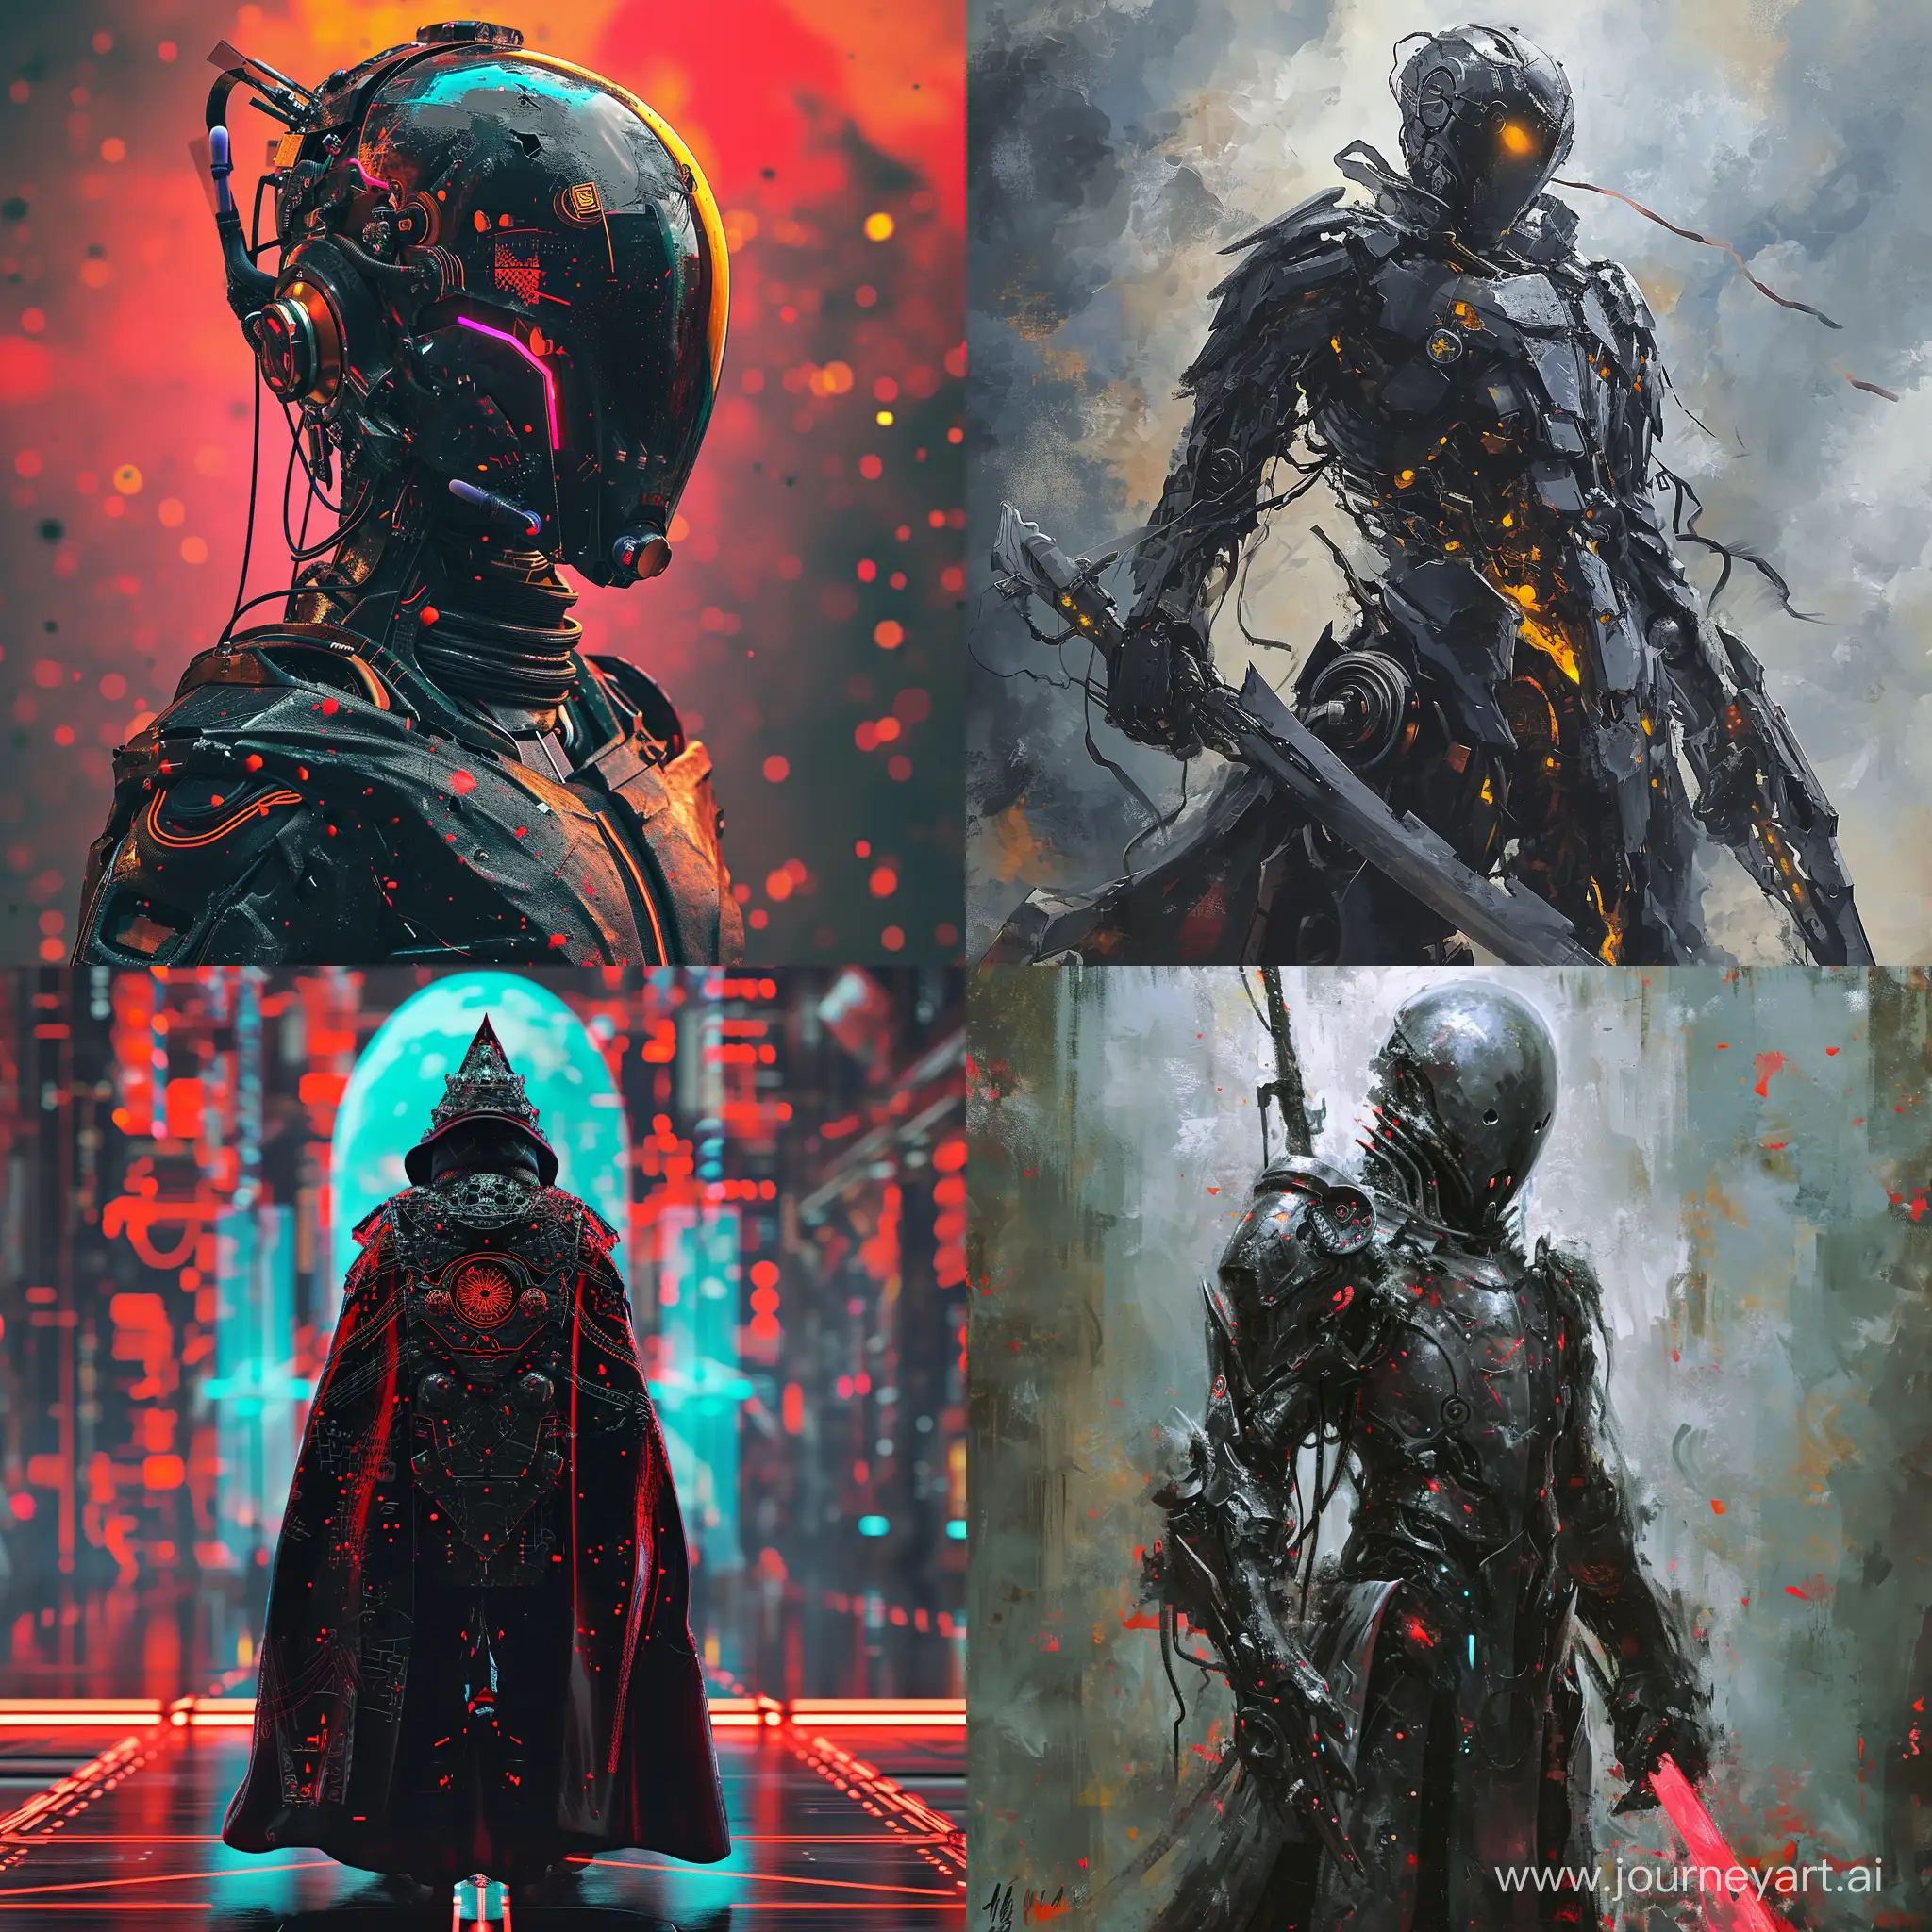 8K, V-Ray, Full length portrait, ::1.1, a cybernetic black knight in unusual fantasy armor, in cyberpunk style, ::1.1, on the background explosion of colors